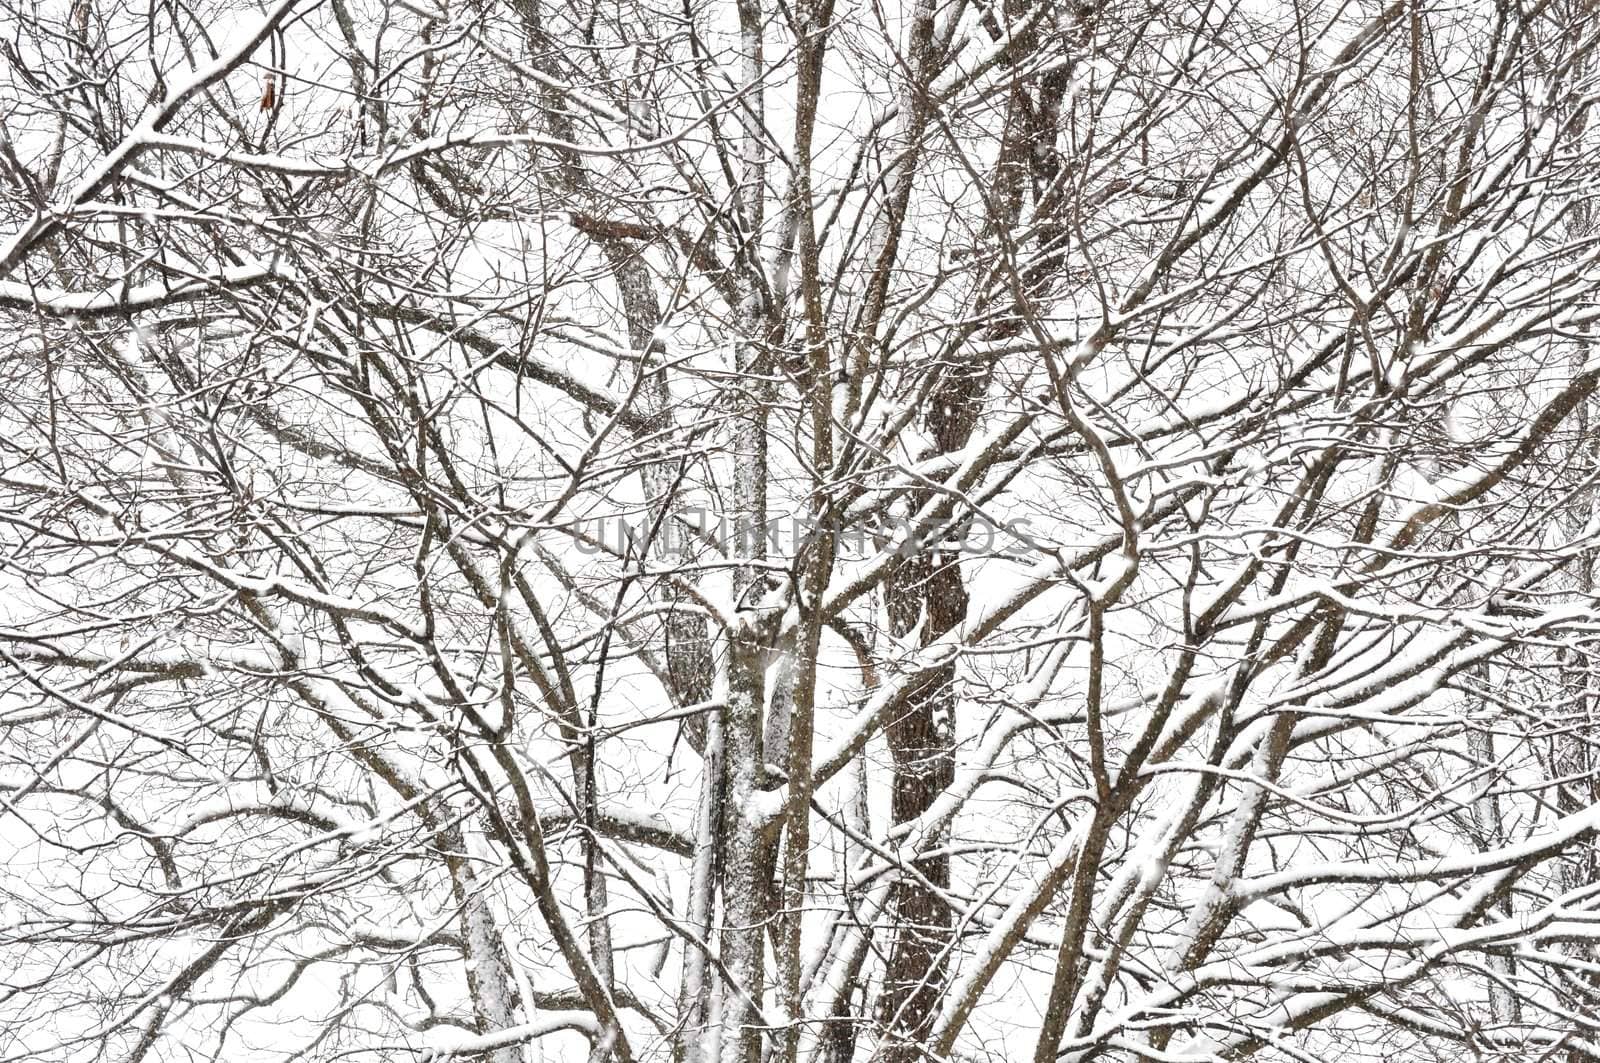 Snowstorm Trees by RefocusPhoto